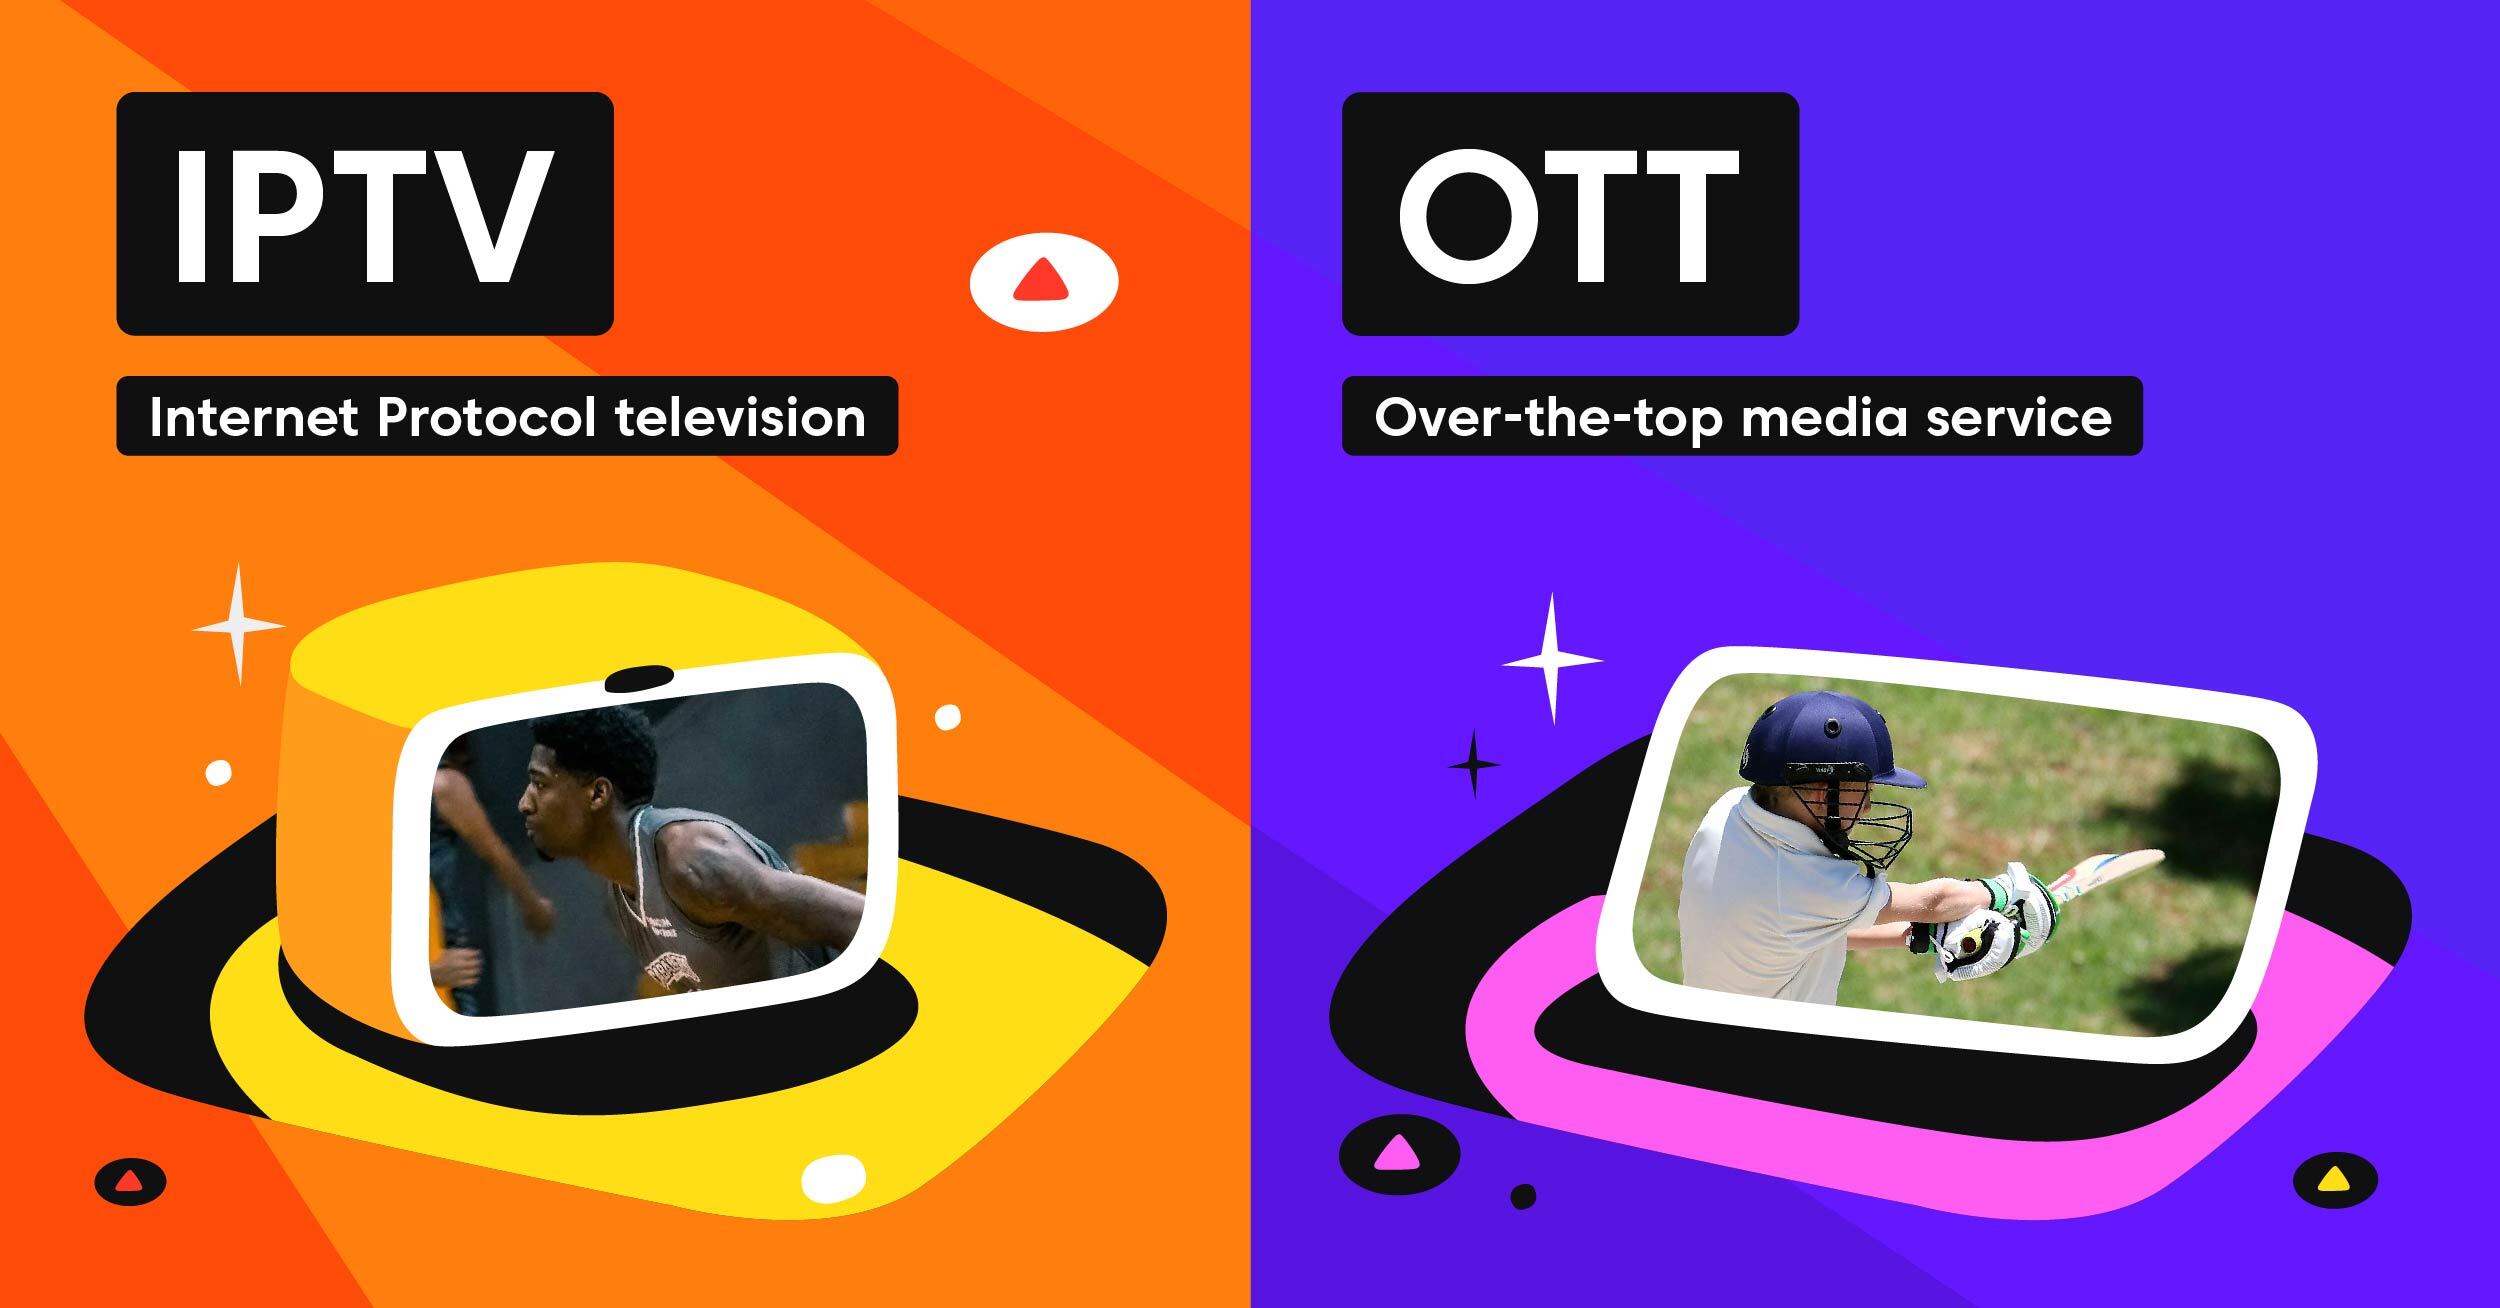 What is the Difference Between IPTV and OTT?